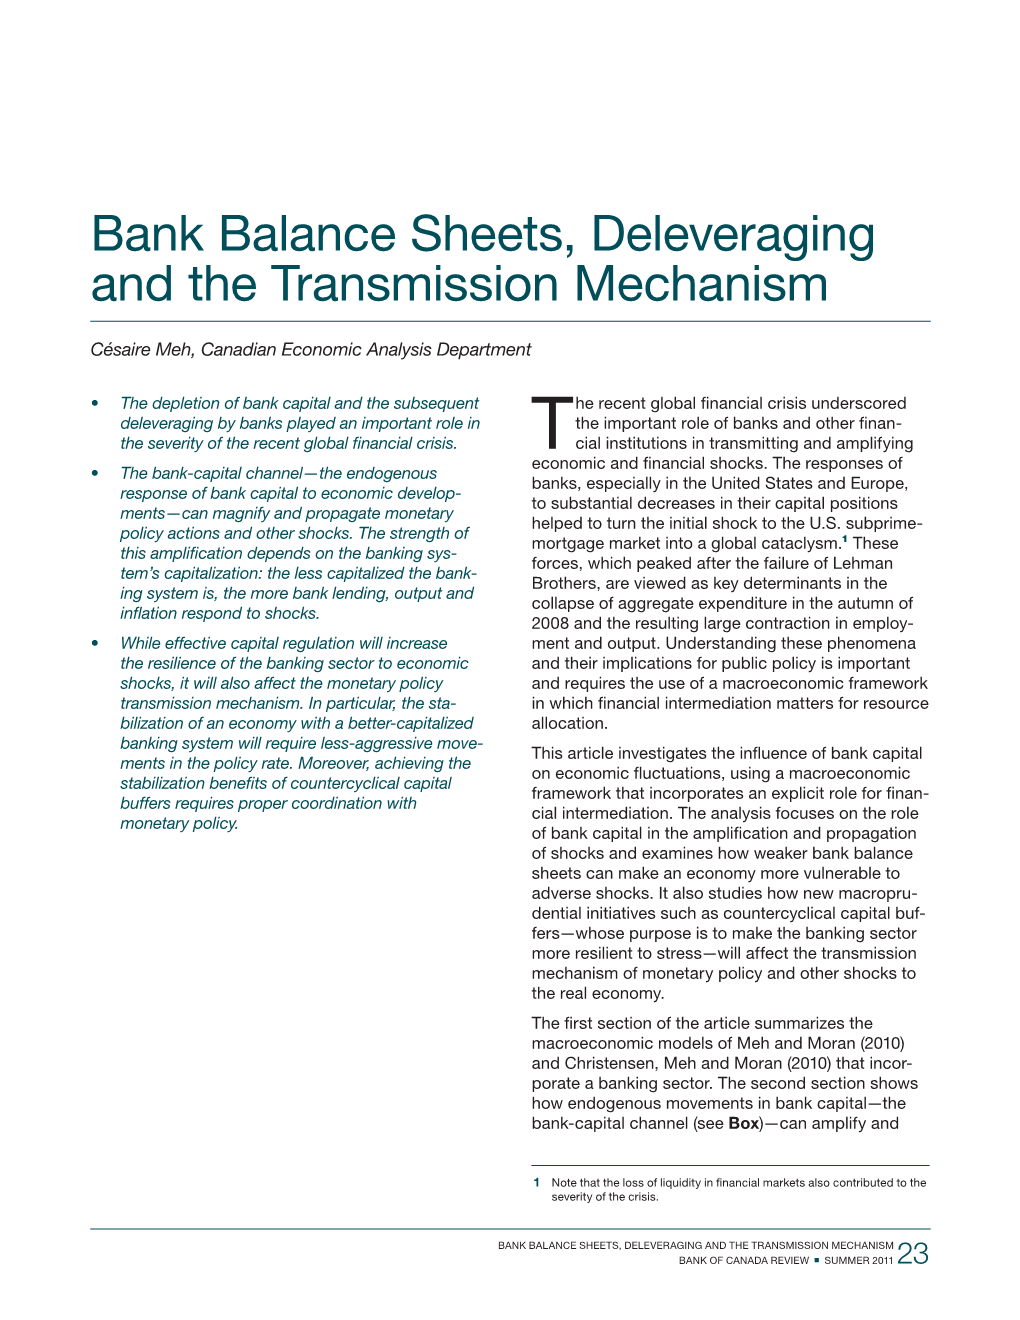 Bank Balance Sheets, Deleveraging and the Transmission Mechanism